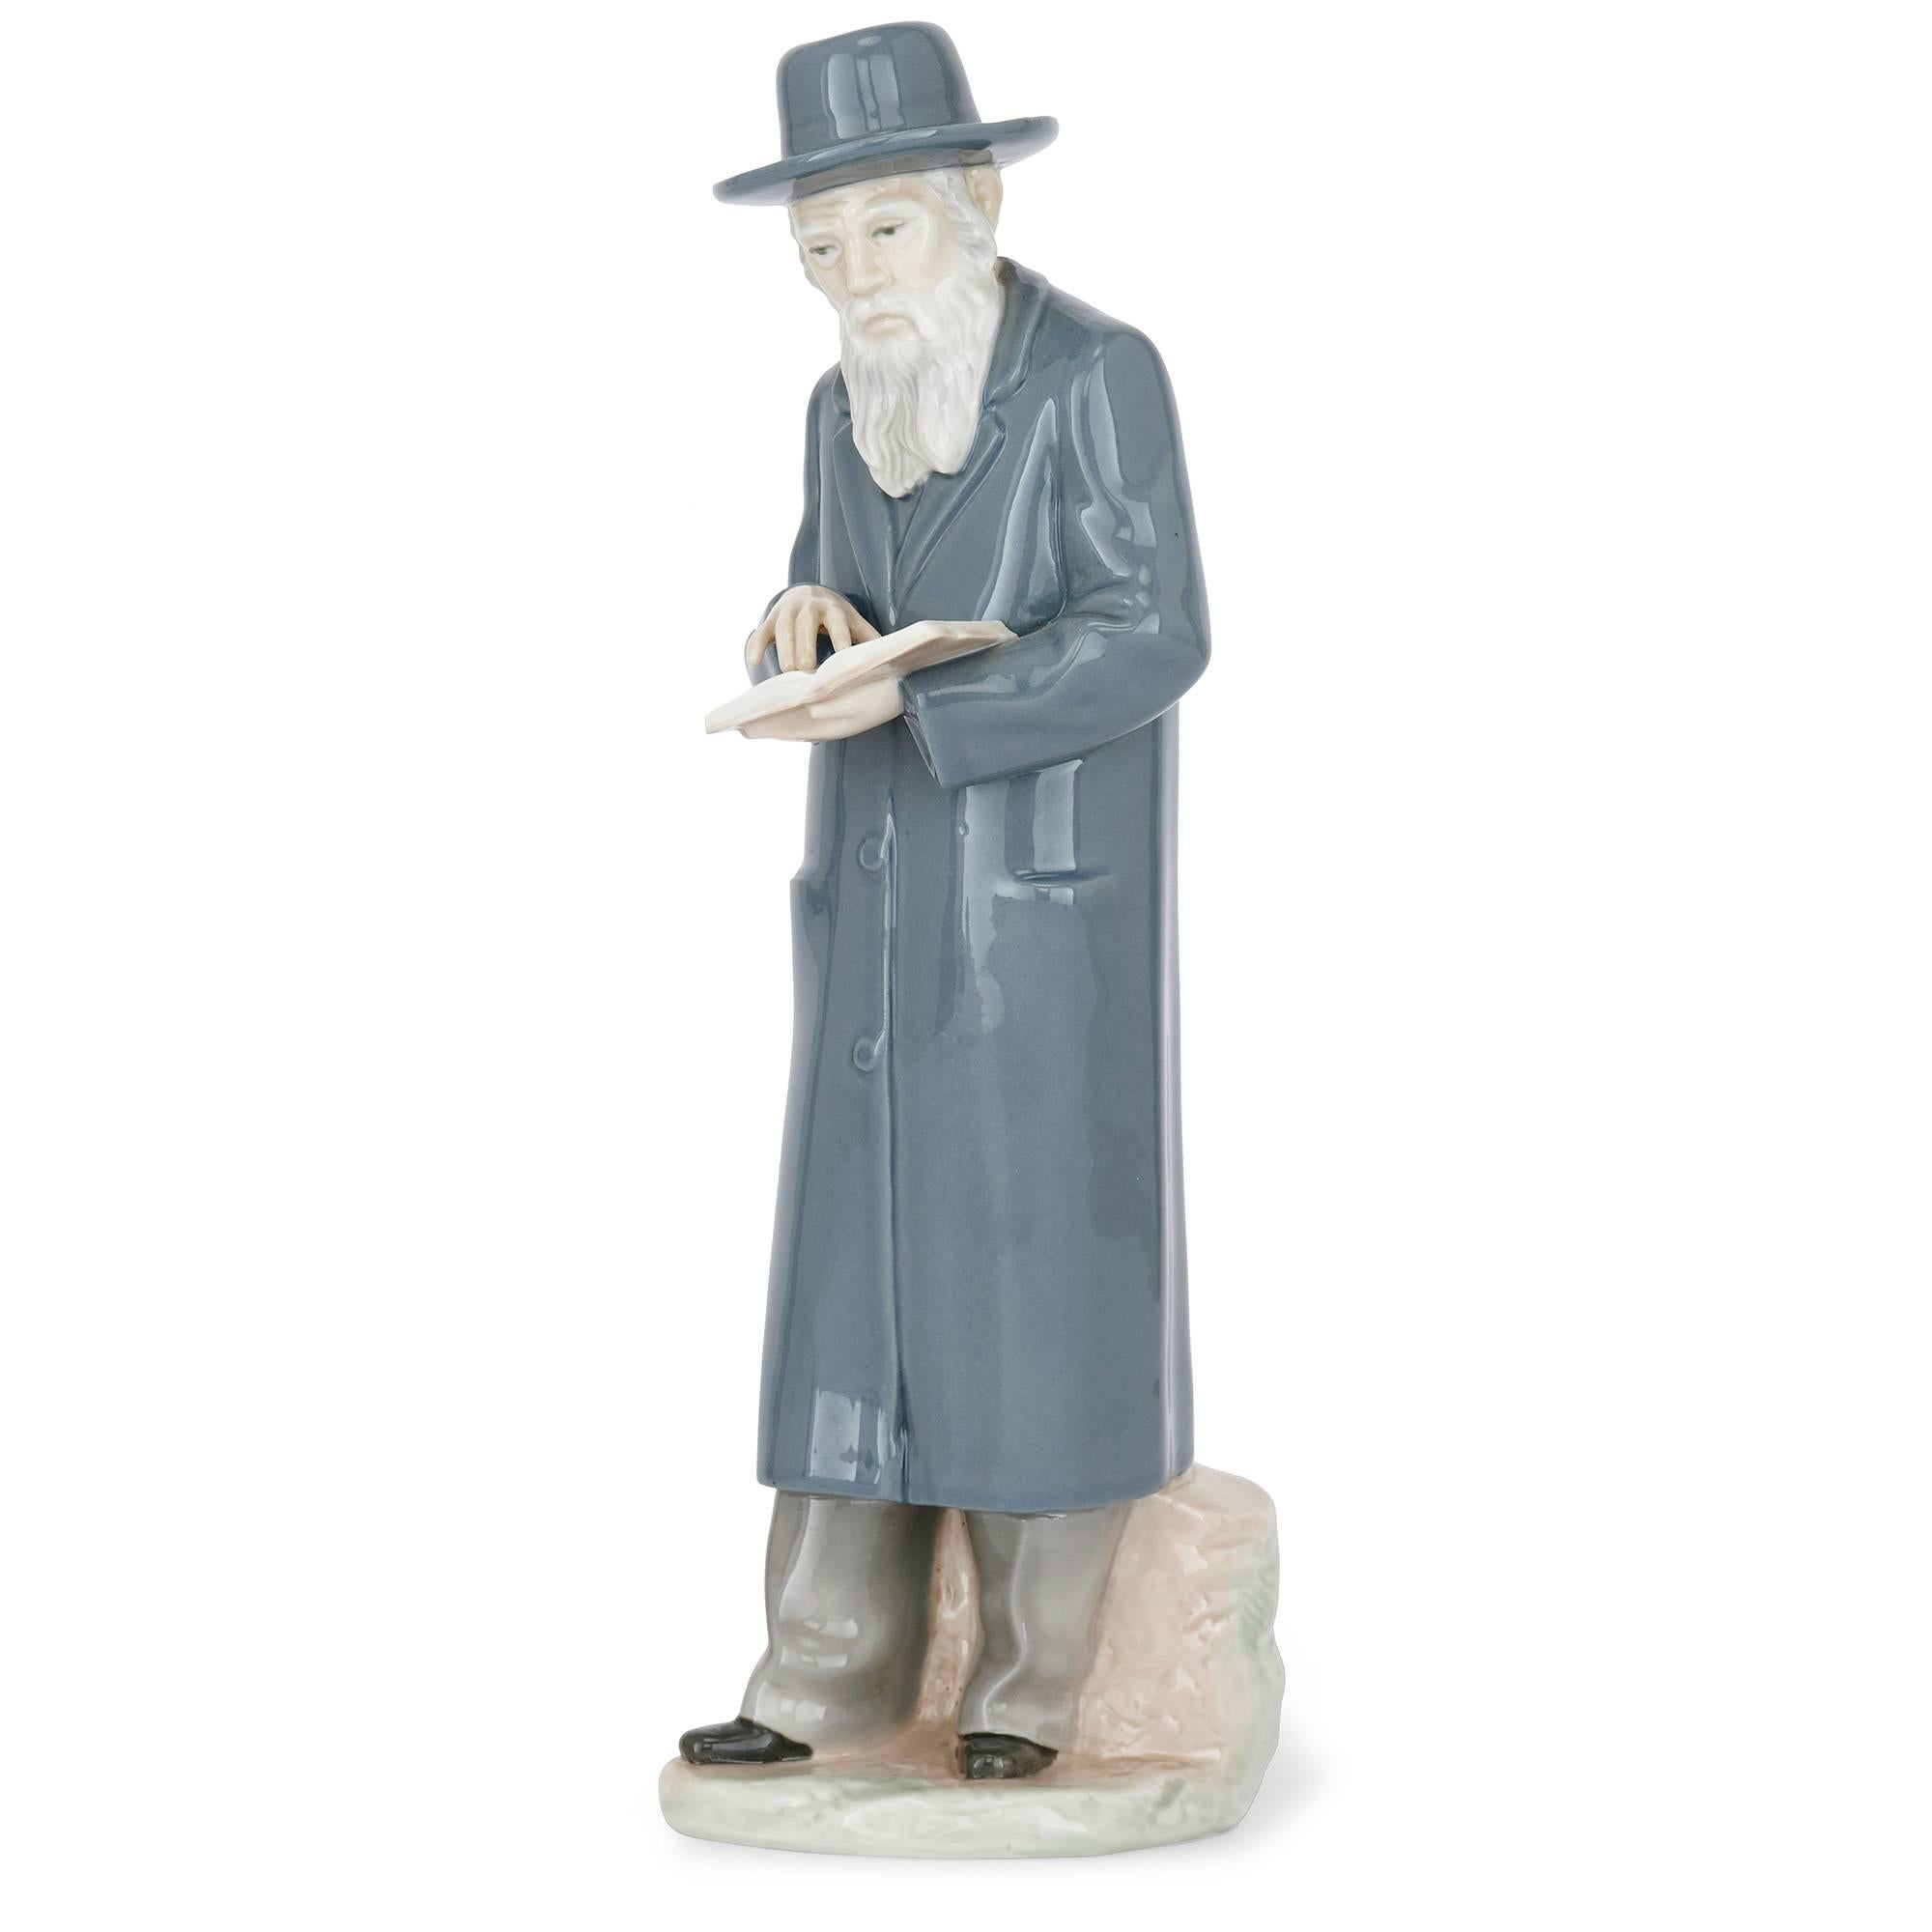 This large antique porcelain figure depicts a Jewish Rabbi with a siddur (prayer book). It is a charming piece of 19th century European porcelain sculptural work, and is a highly collectable decorative piece. Set on a white plinth, the Rabbi is